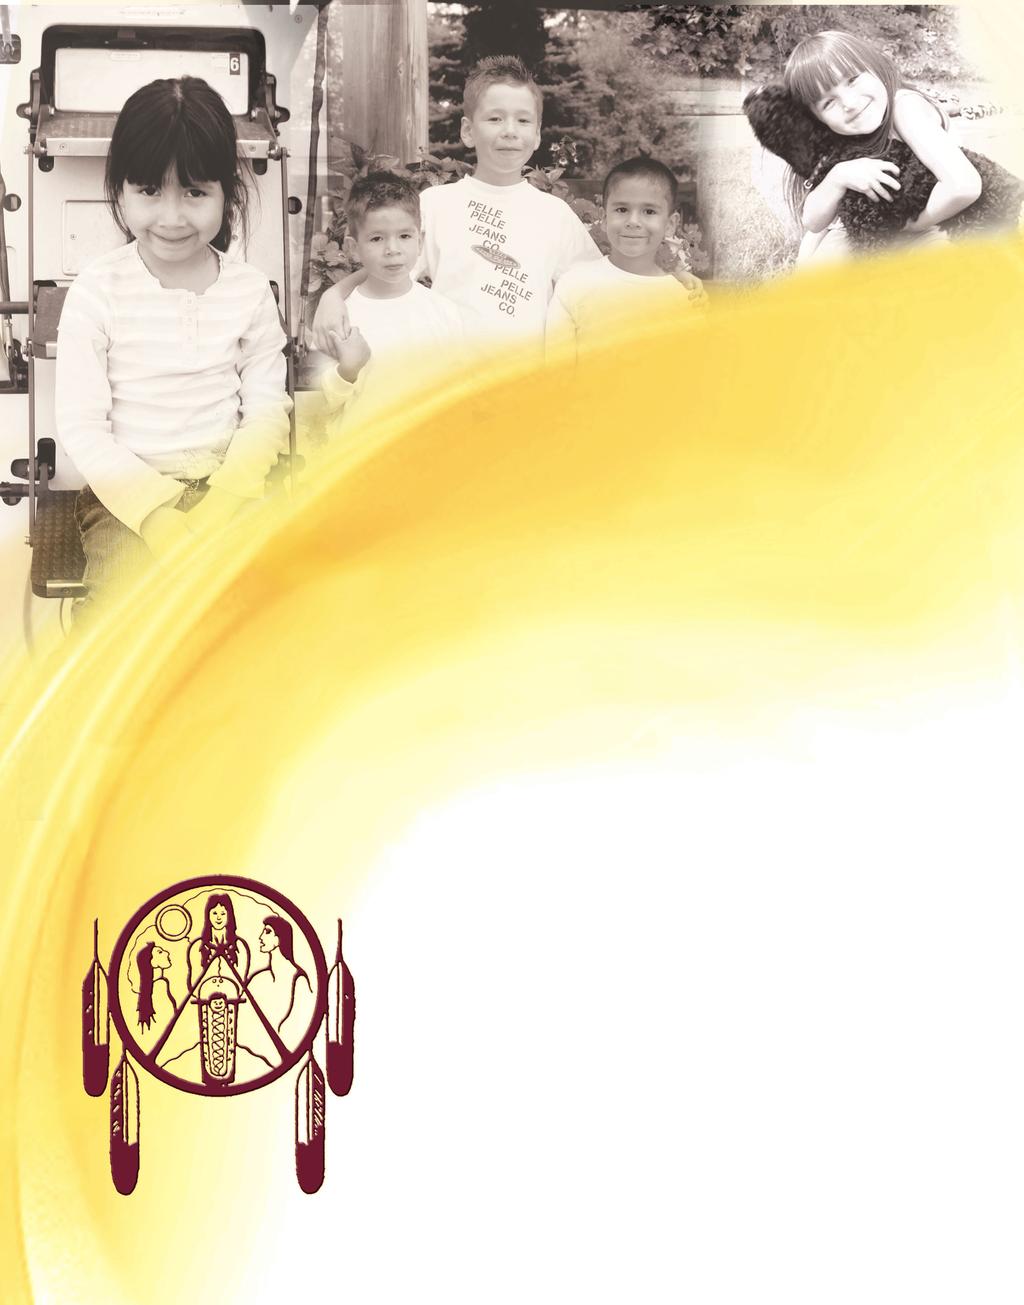 Tikinagan Child and Family Services 2007-2008 Annual Report The Answers Lie Within the Communities